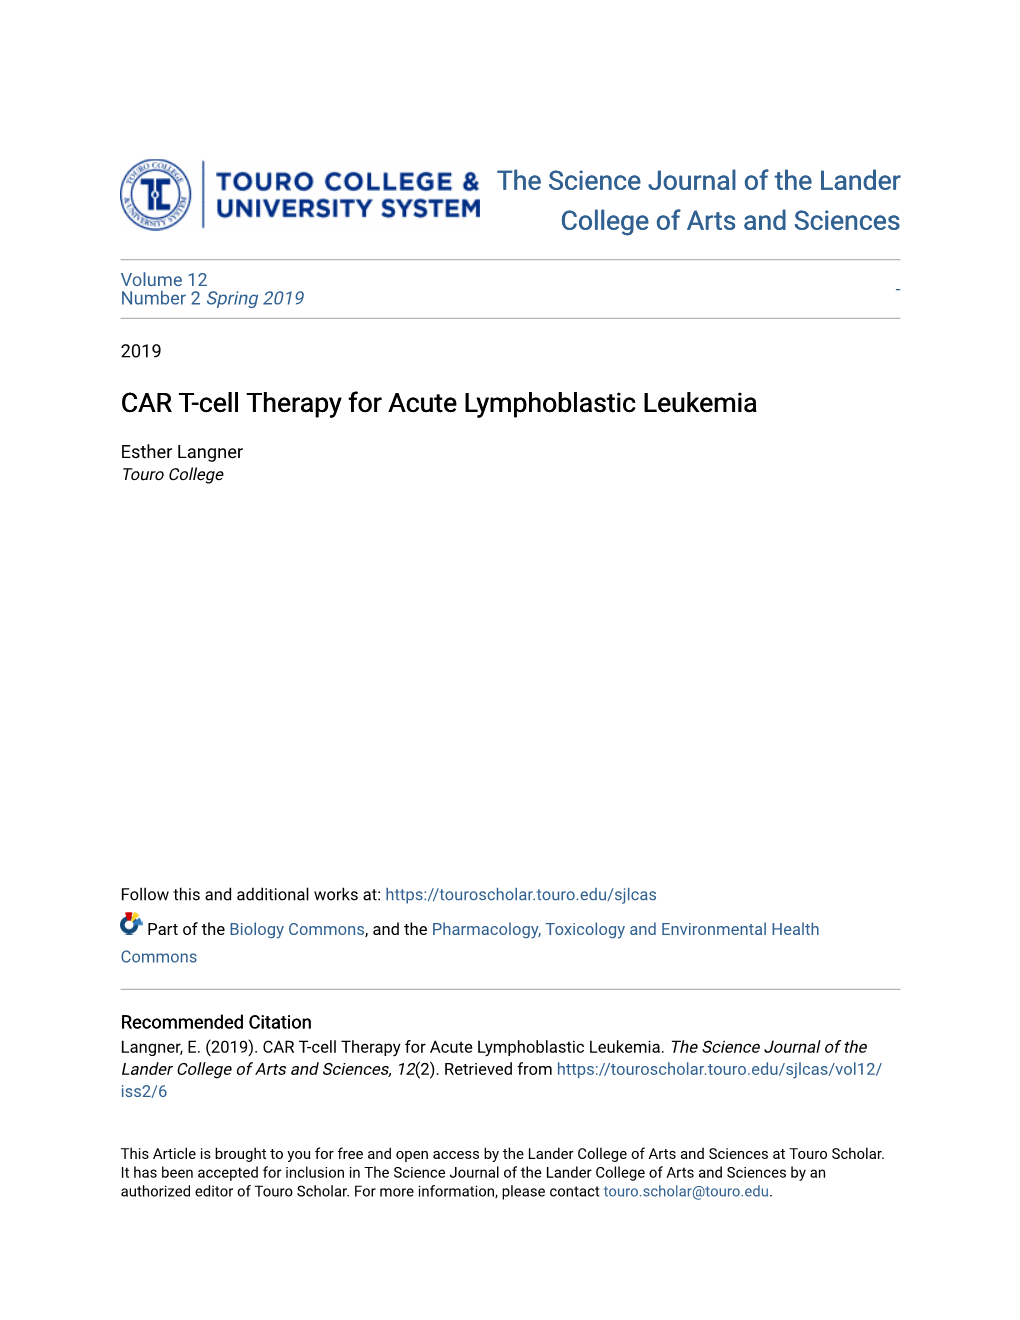 CAR T-Cell Therapy for Acute Lymphoblastic Leukemia